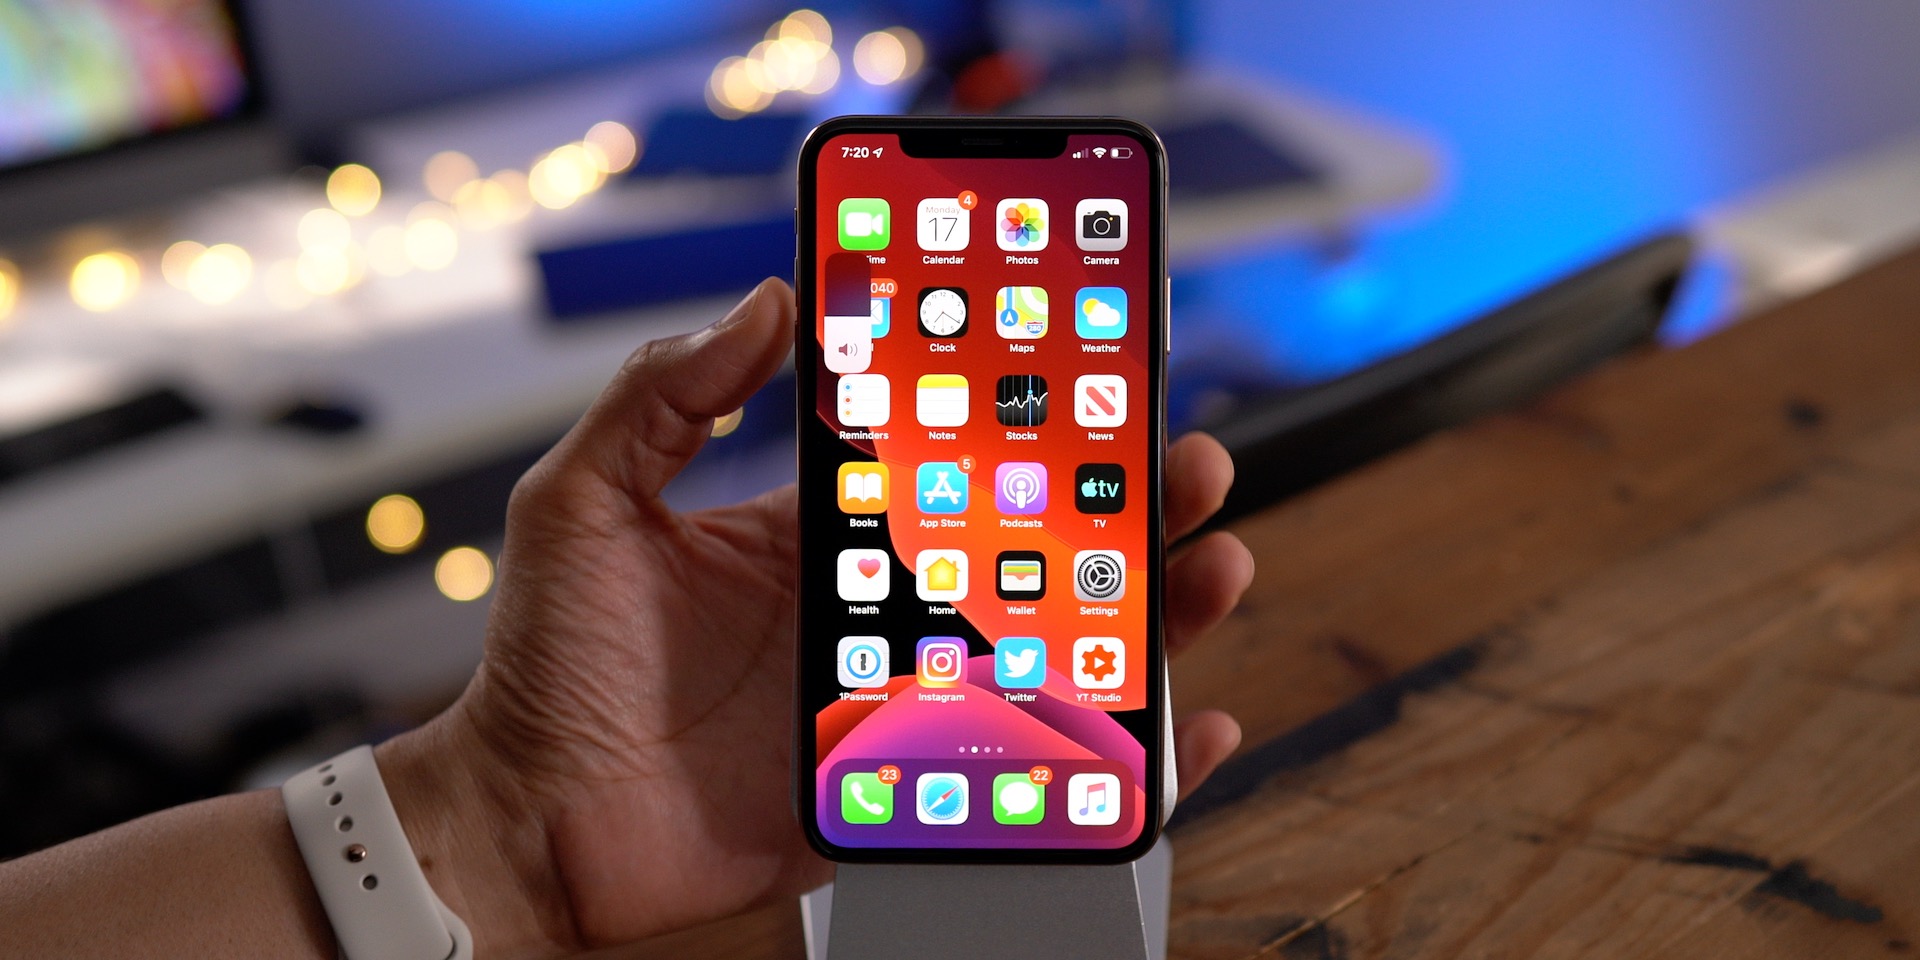 Hands-on: The best iOS 13 and iPadOS 13 features [Video] - 9to5Mac